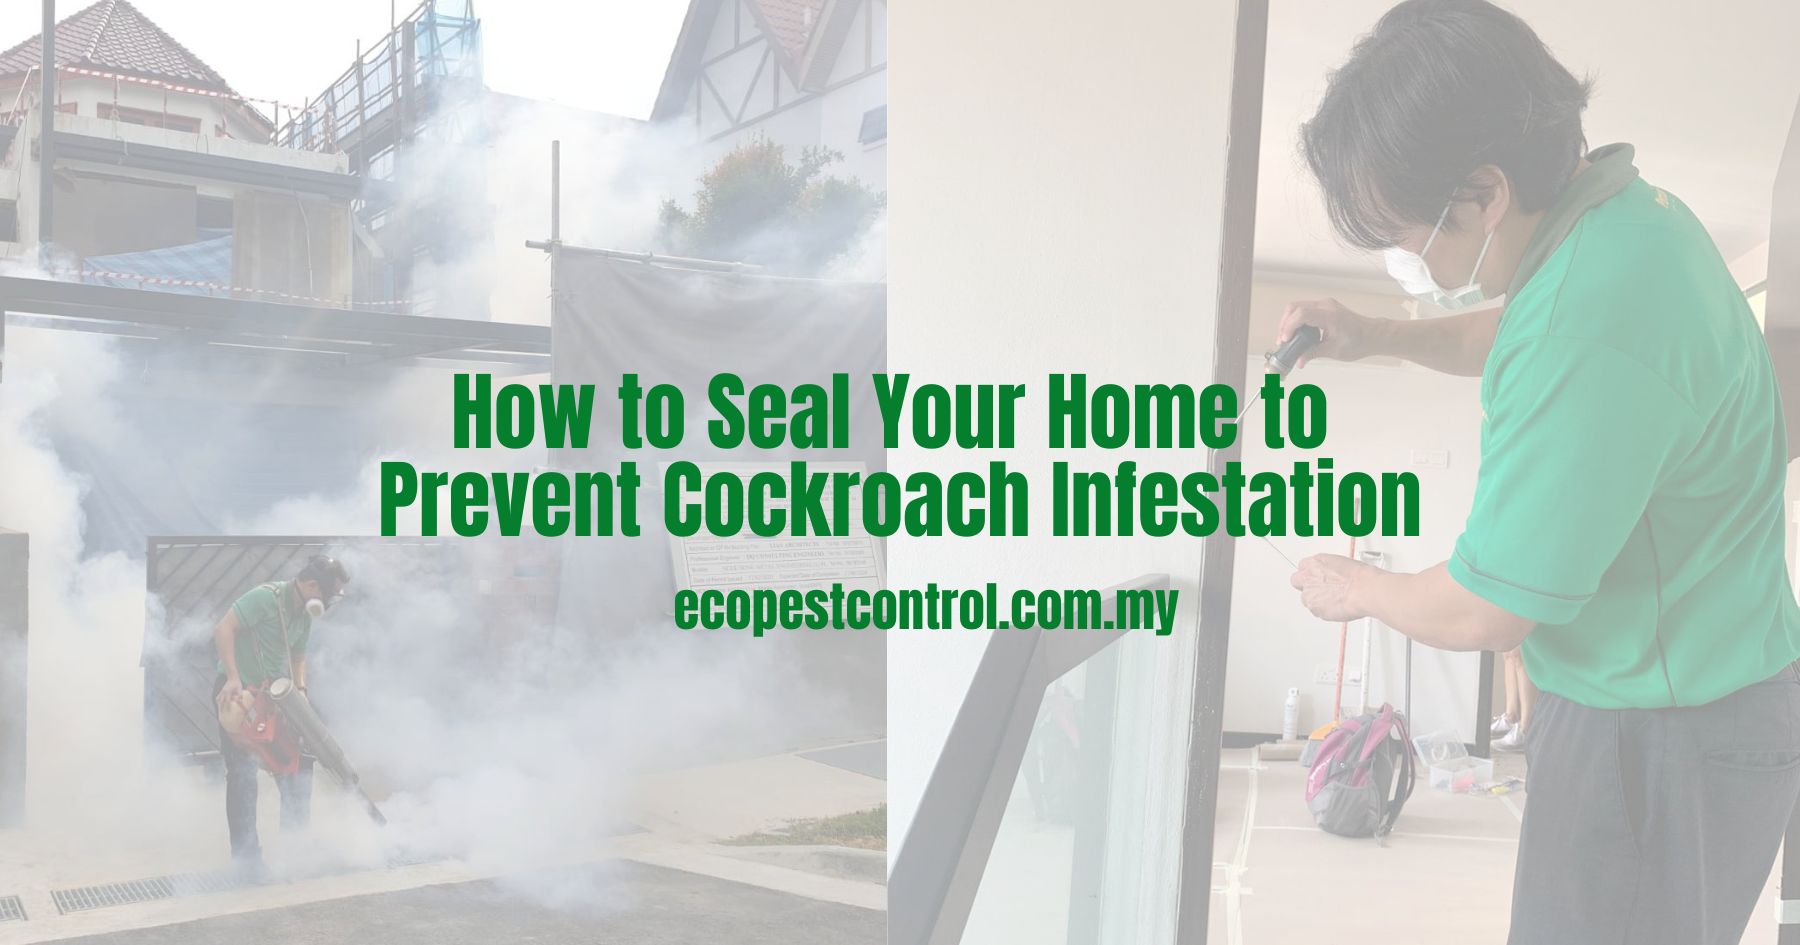 How to Seal Your Home to Prevent Cockroach Infestation